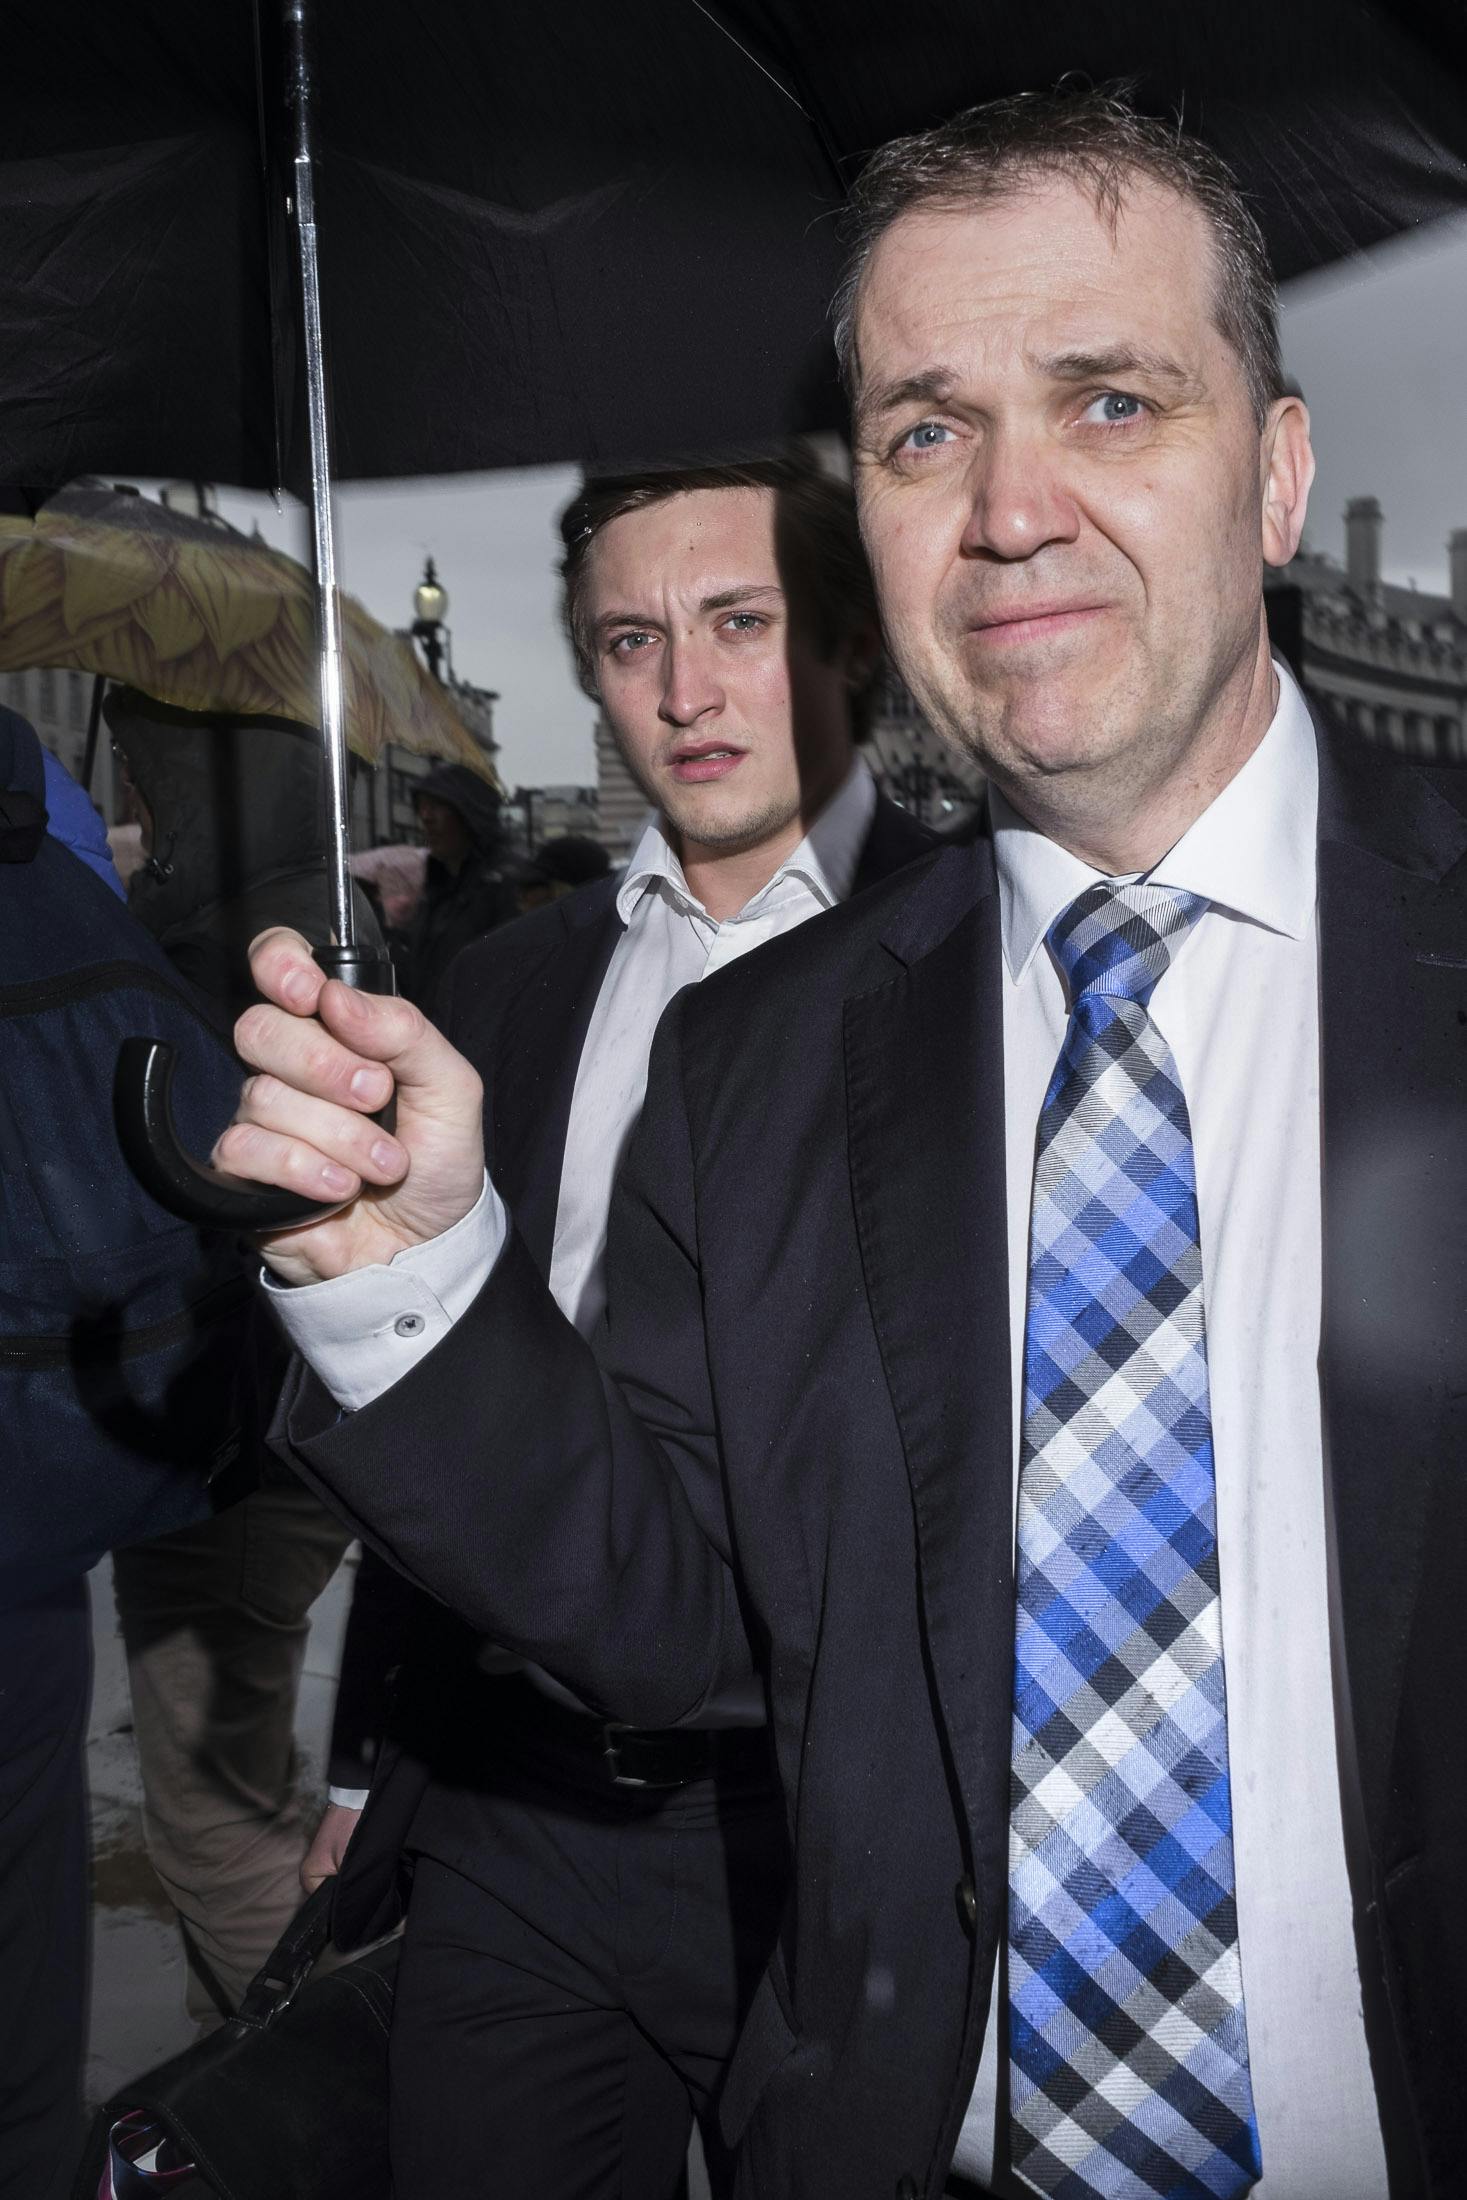 Two business men under an umbrella in suits in Piccadilly Circus, London.